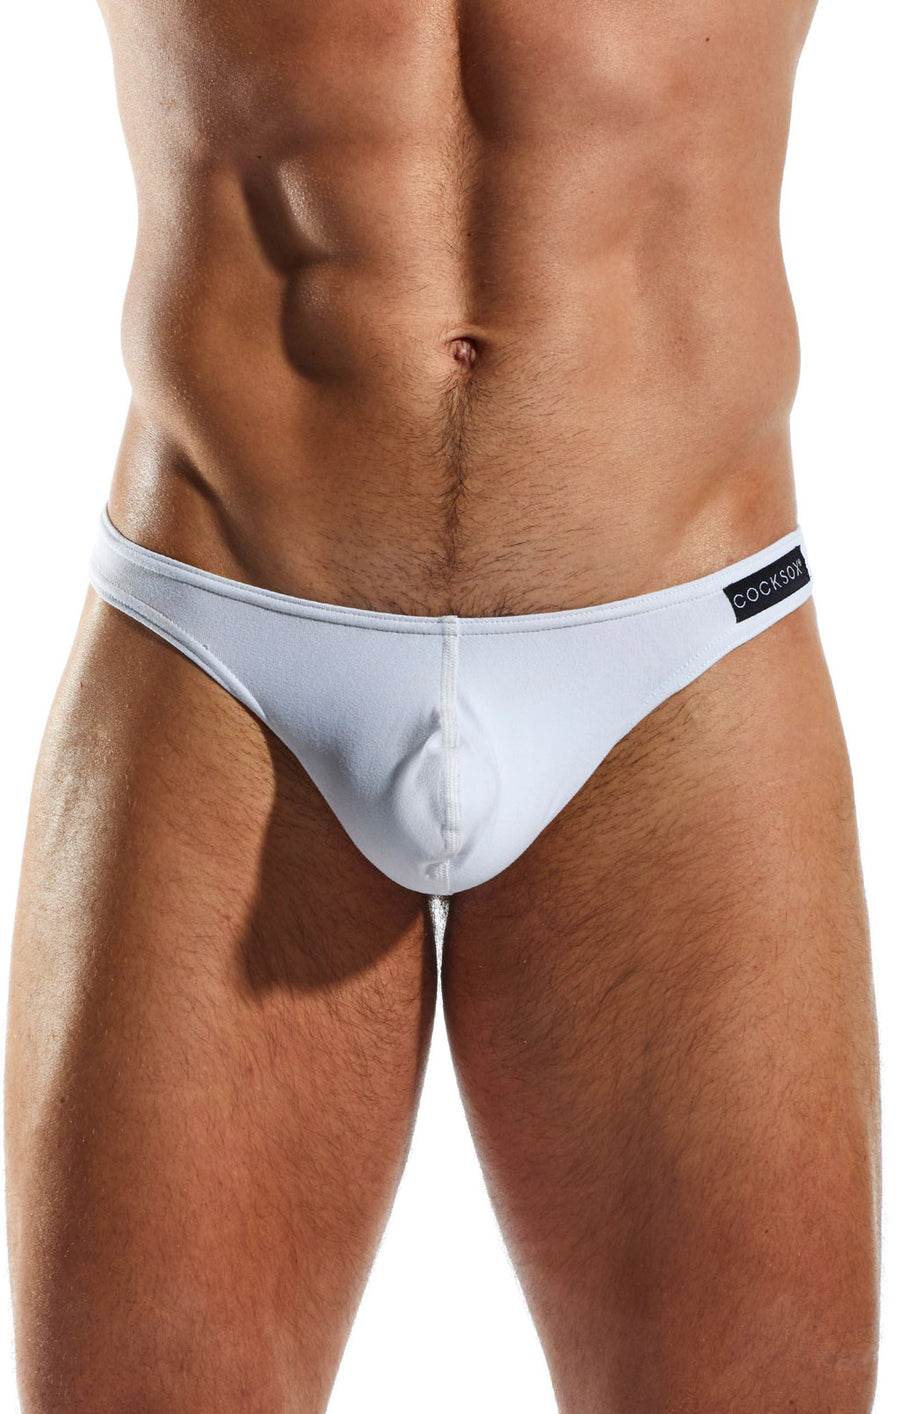 Cocksox® Mens Low Rise Bulge Pouch Thong Underwear